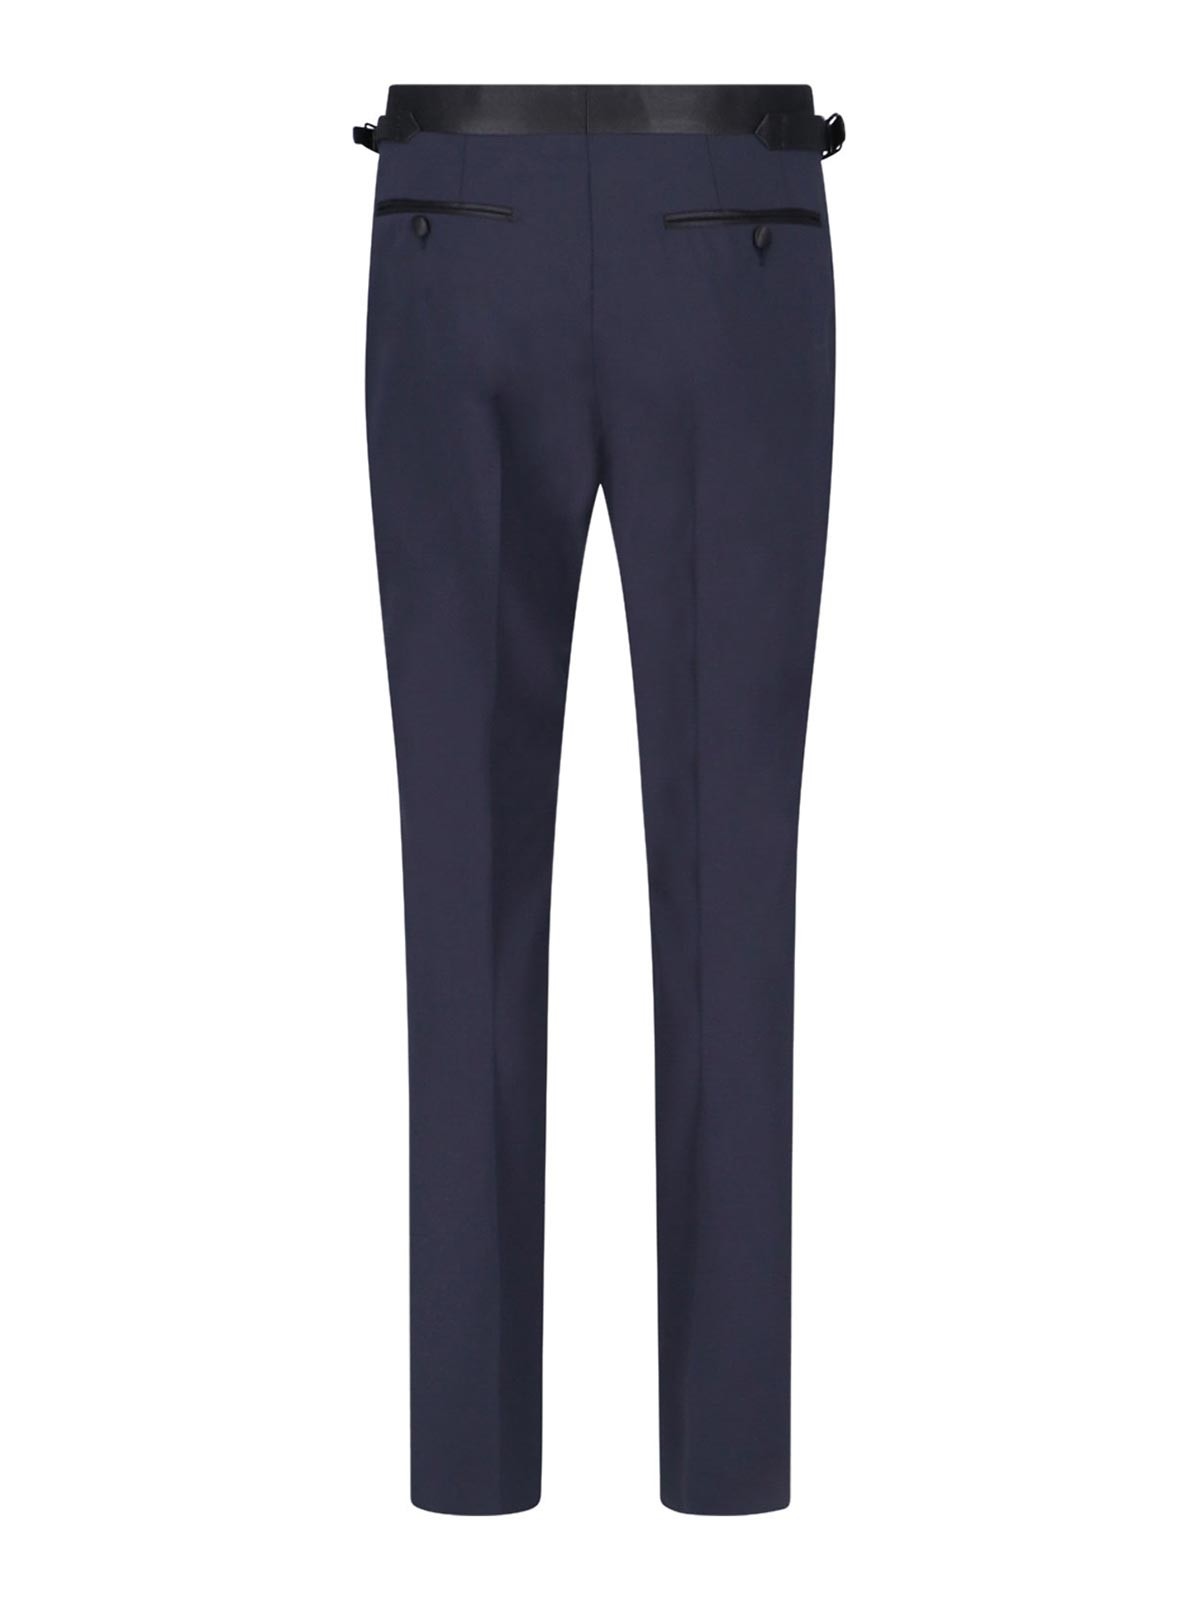 Shop Tom Ford Single-breasted Suit In Blue